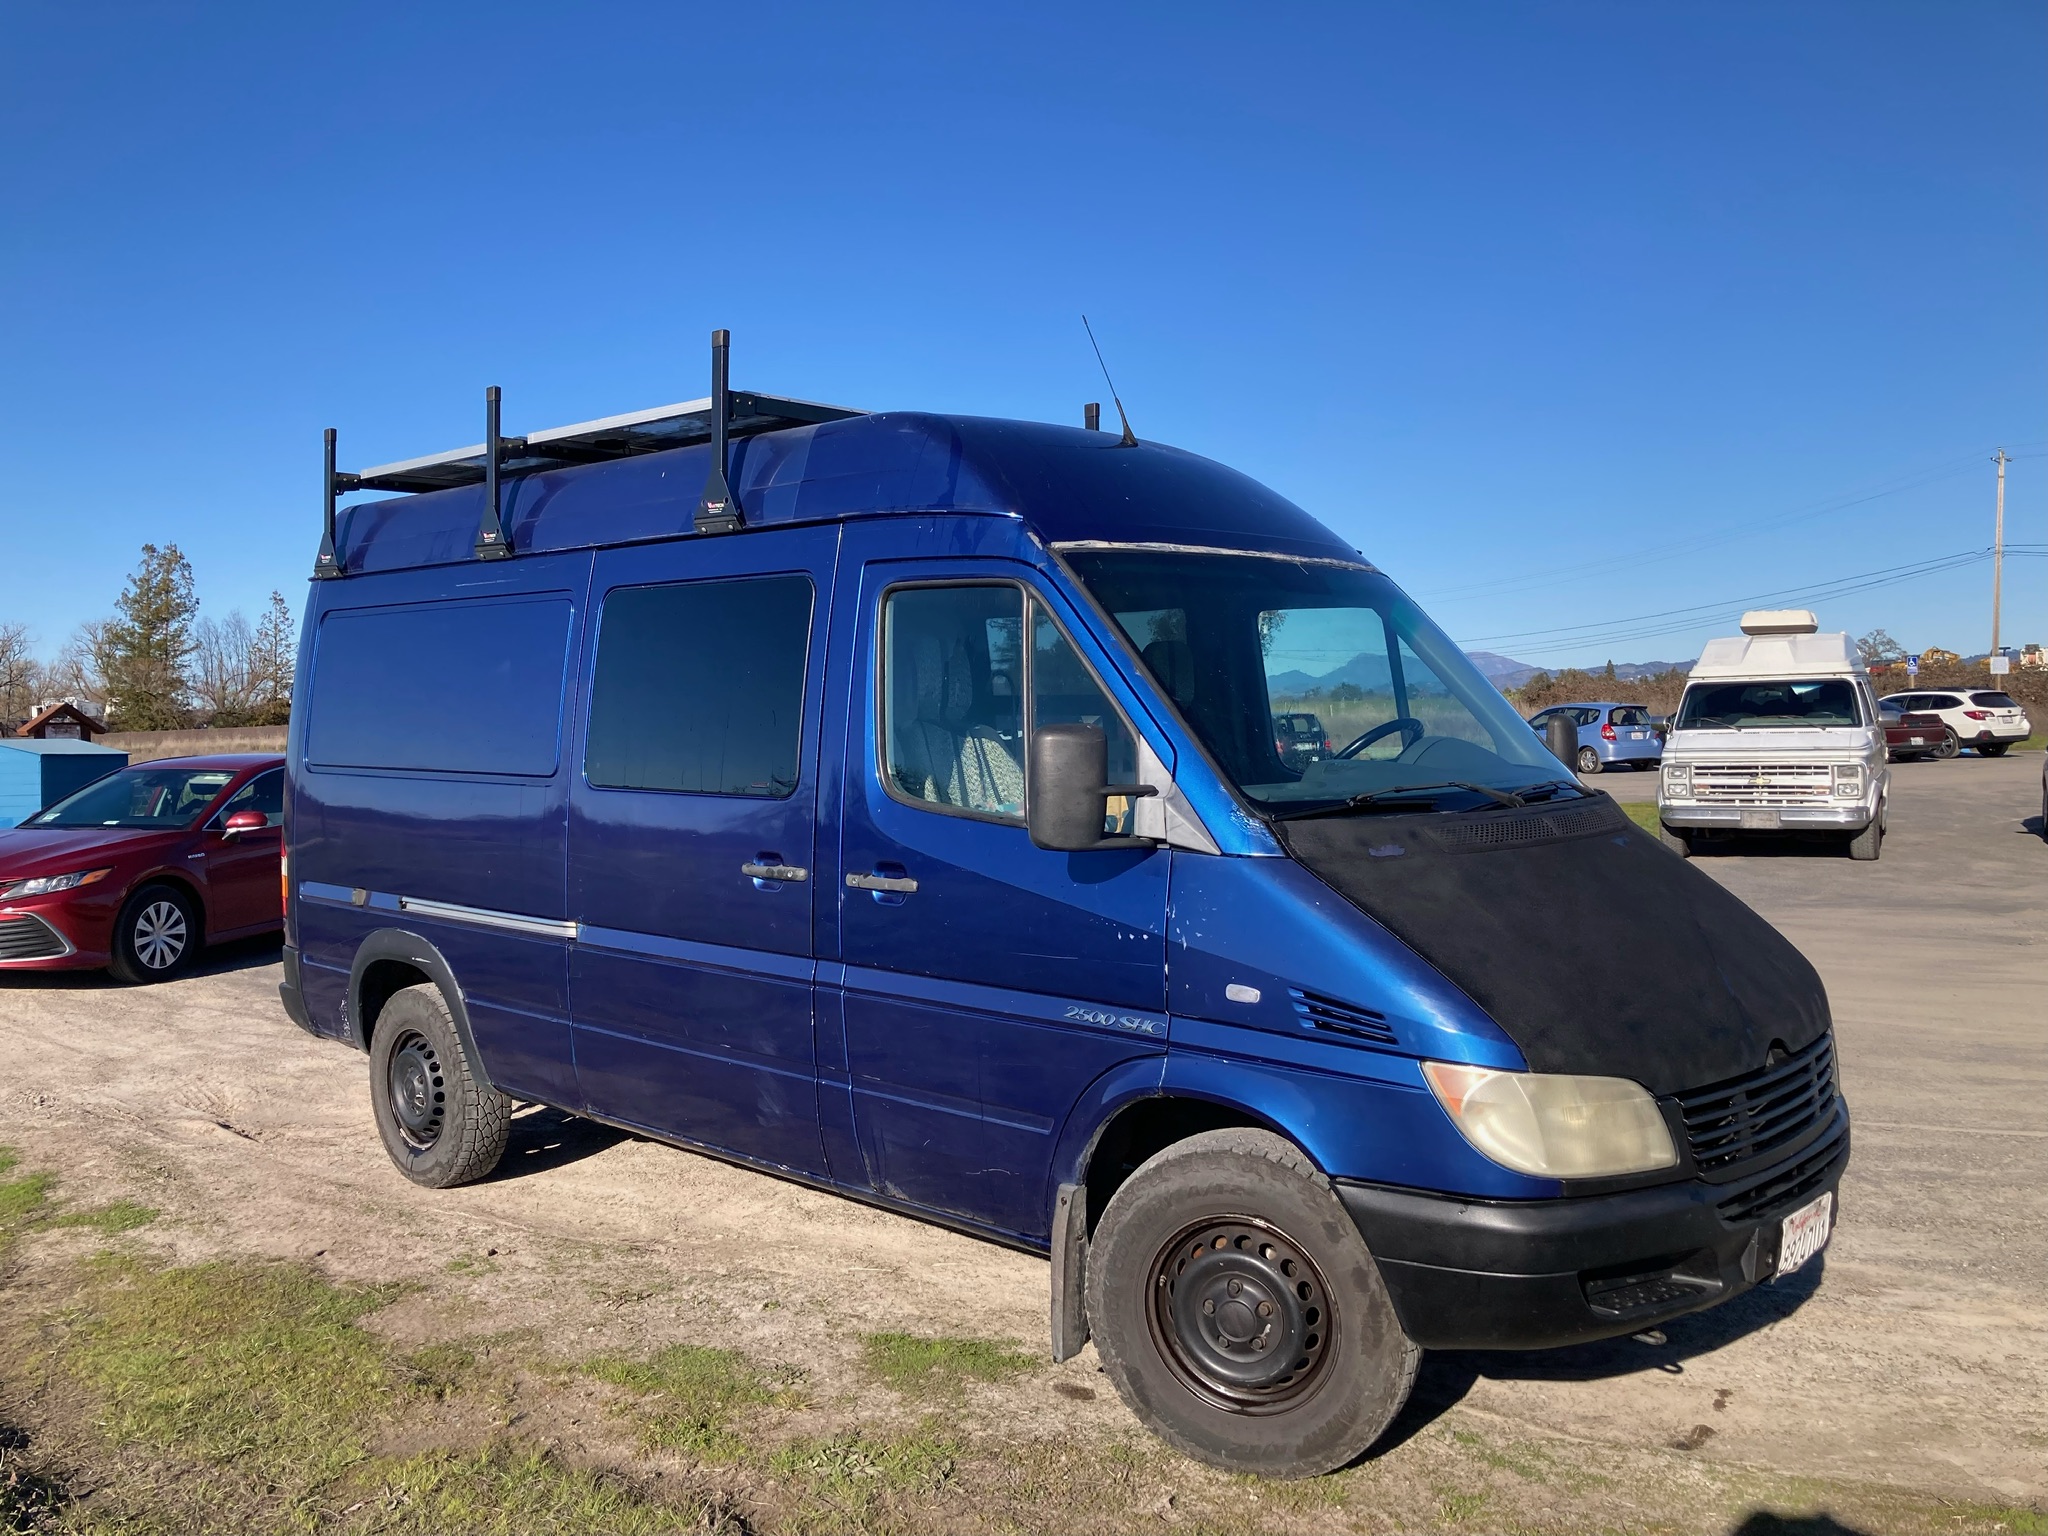 Overland Classifieds :: 2004 Dodge Sprinter T1N 2500 - Expedition Portal